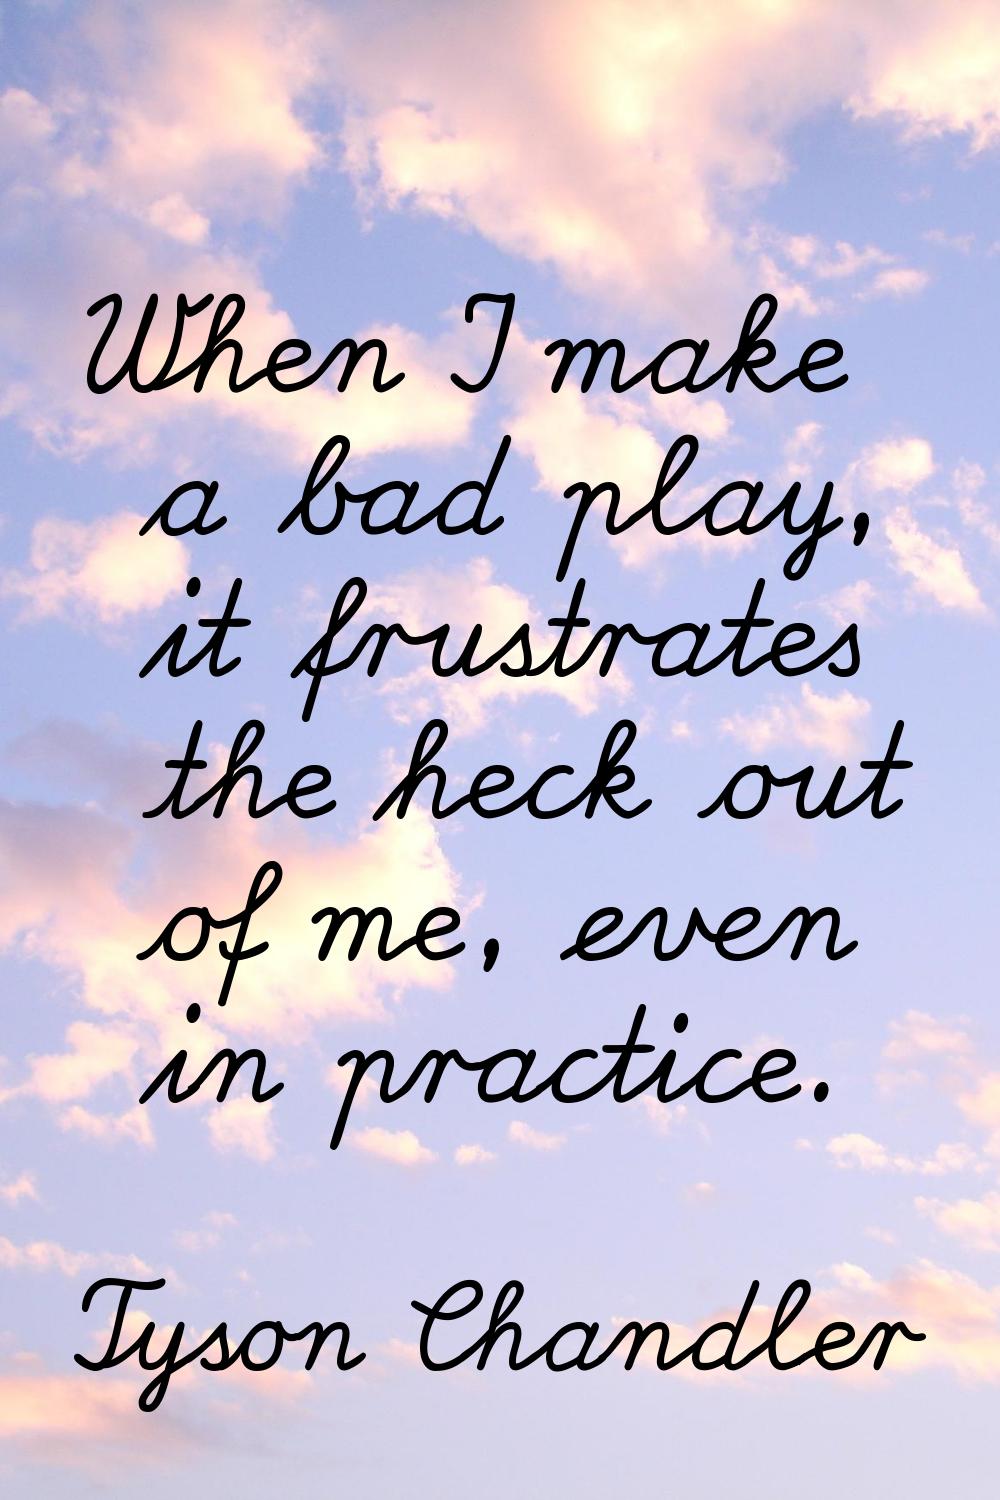 When I make a bad play, it frustrates the heck out of me, even in practice.